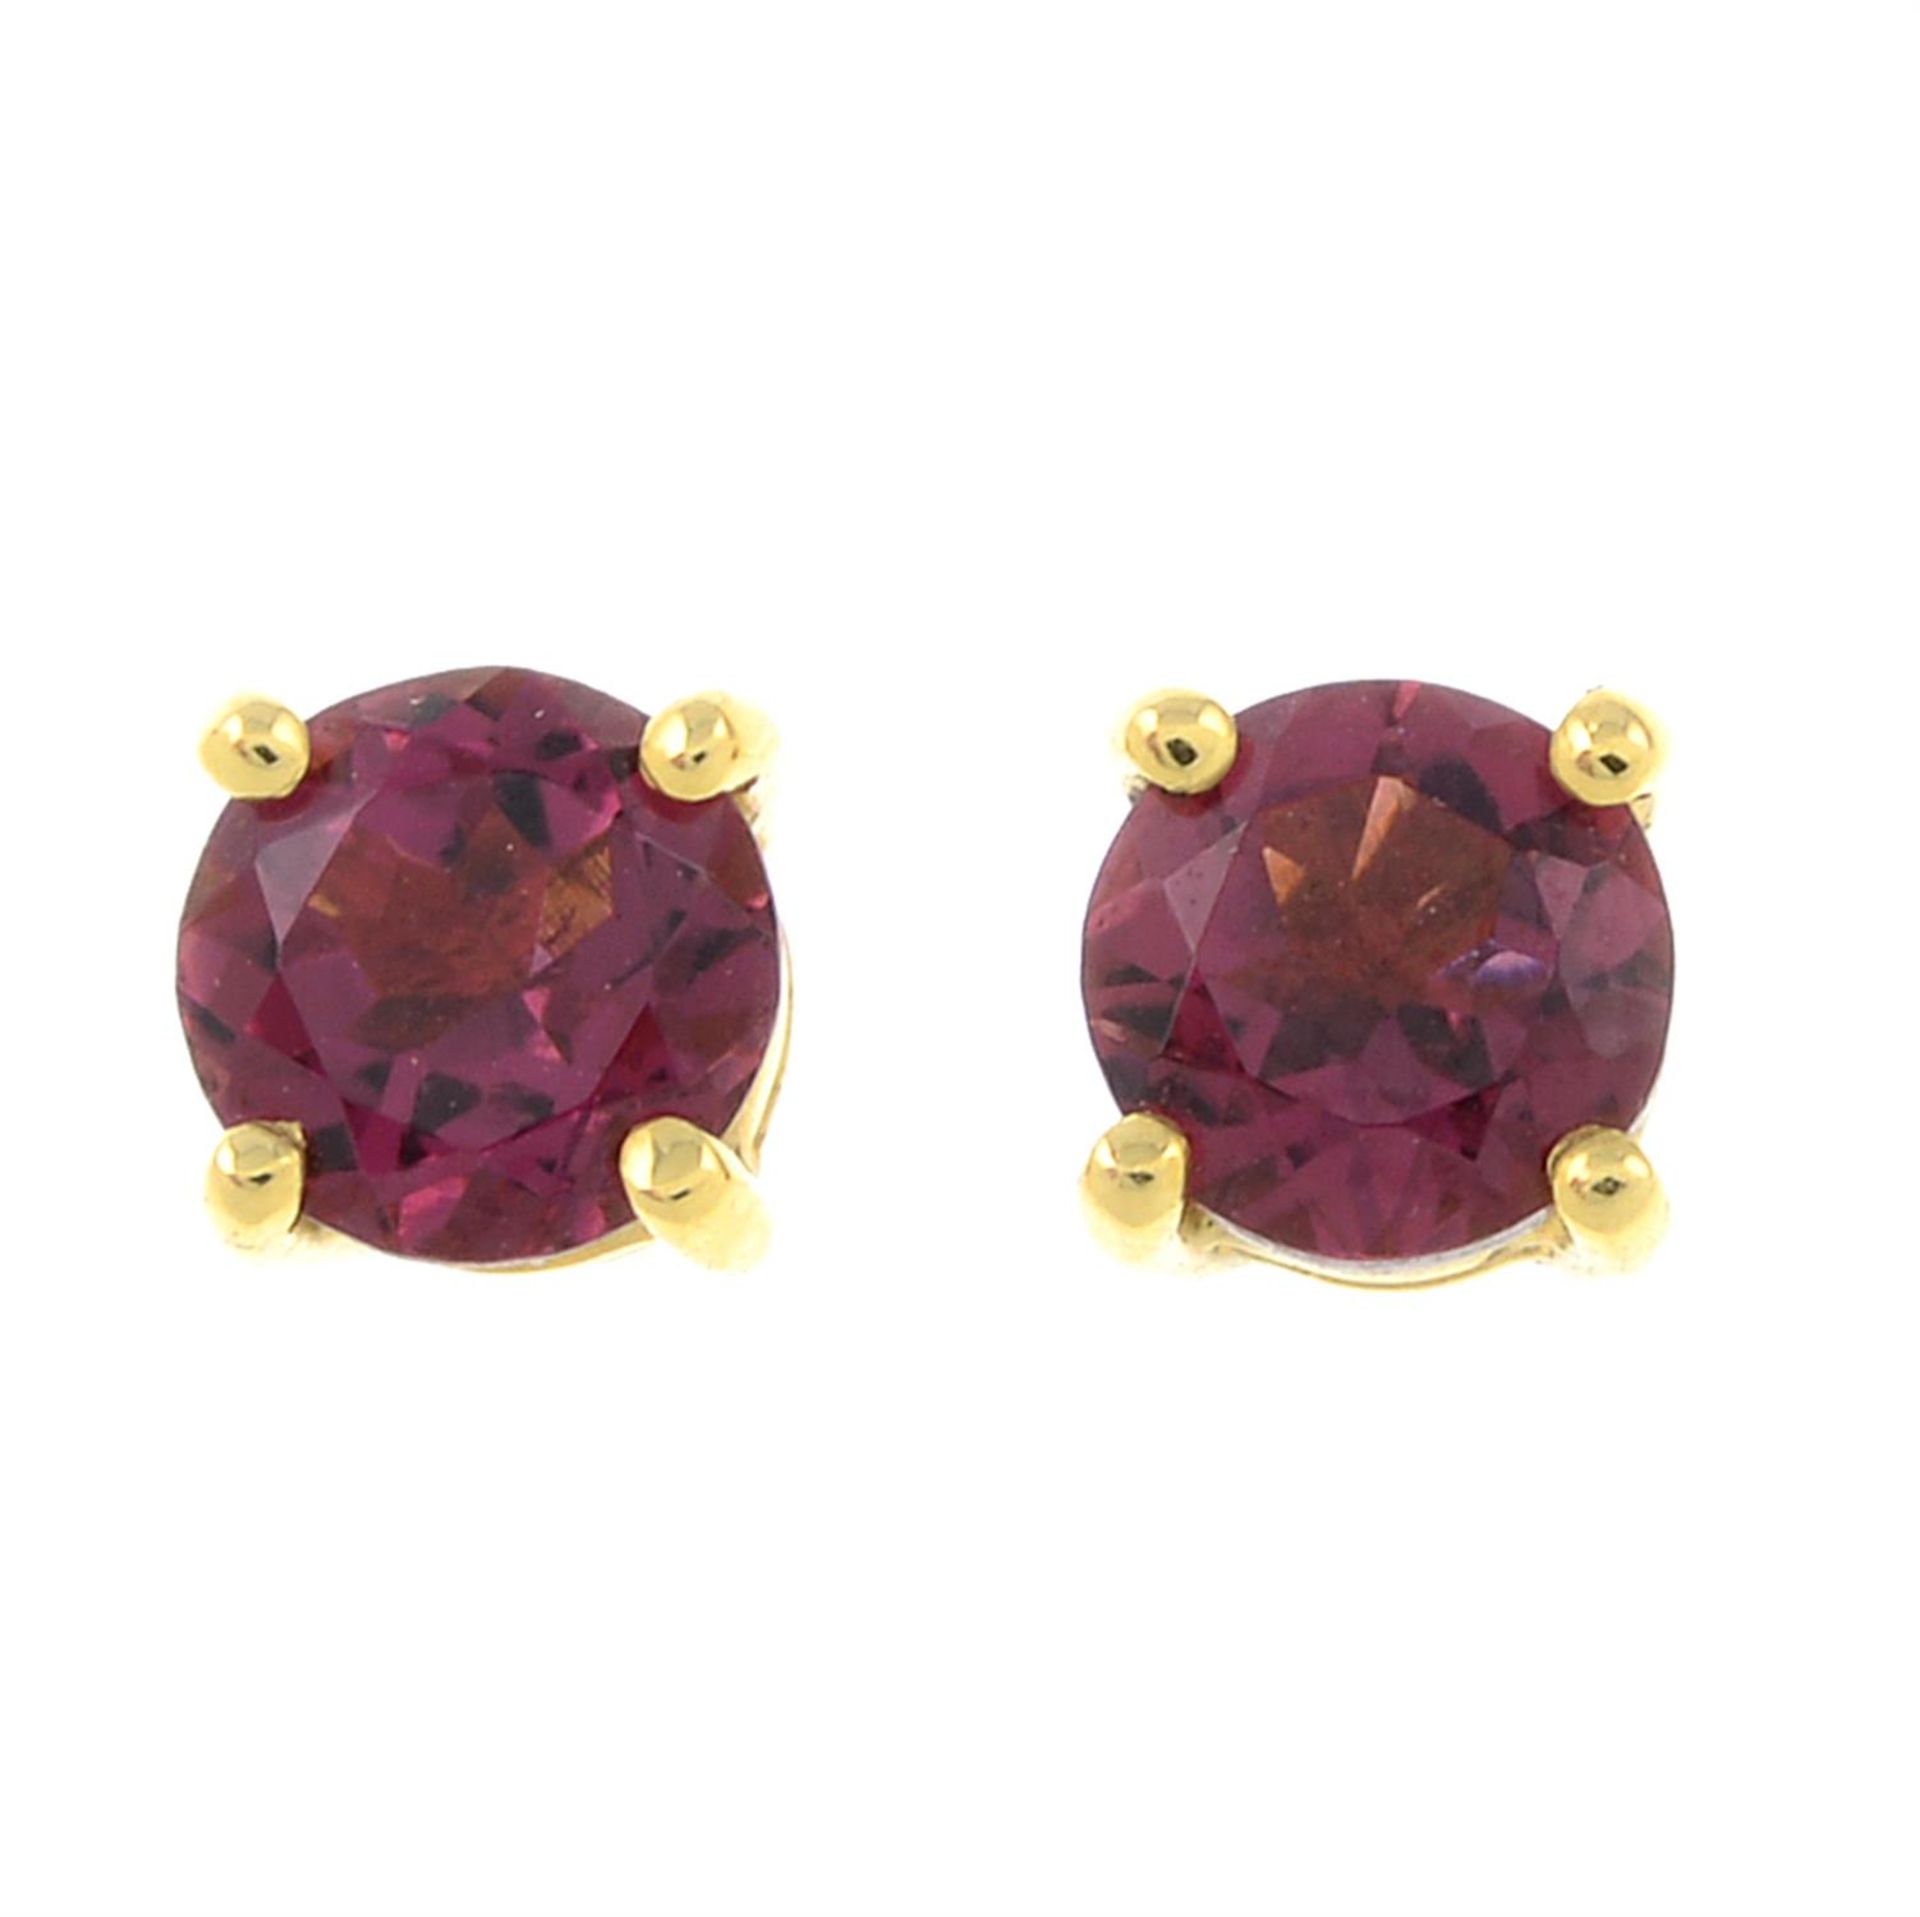 A pair of 18ct gold pink tourmaline stud earrings.